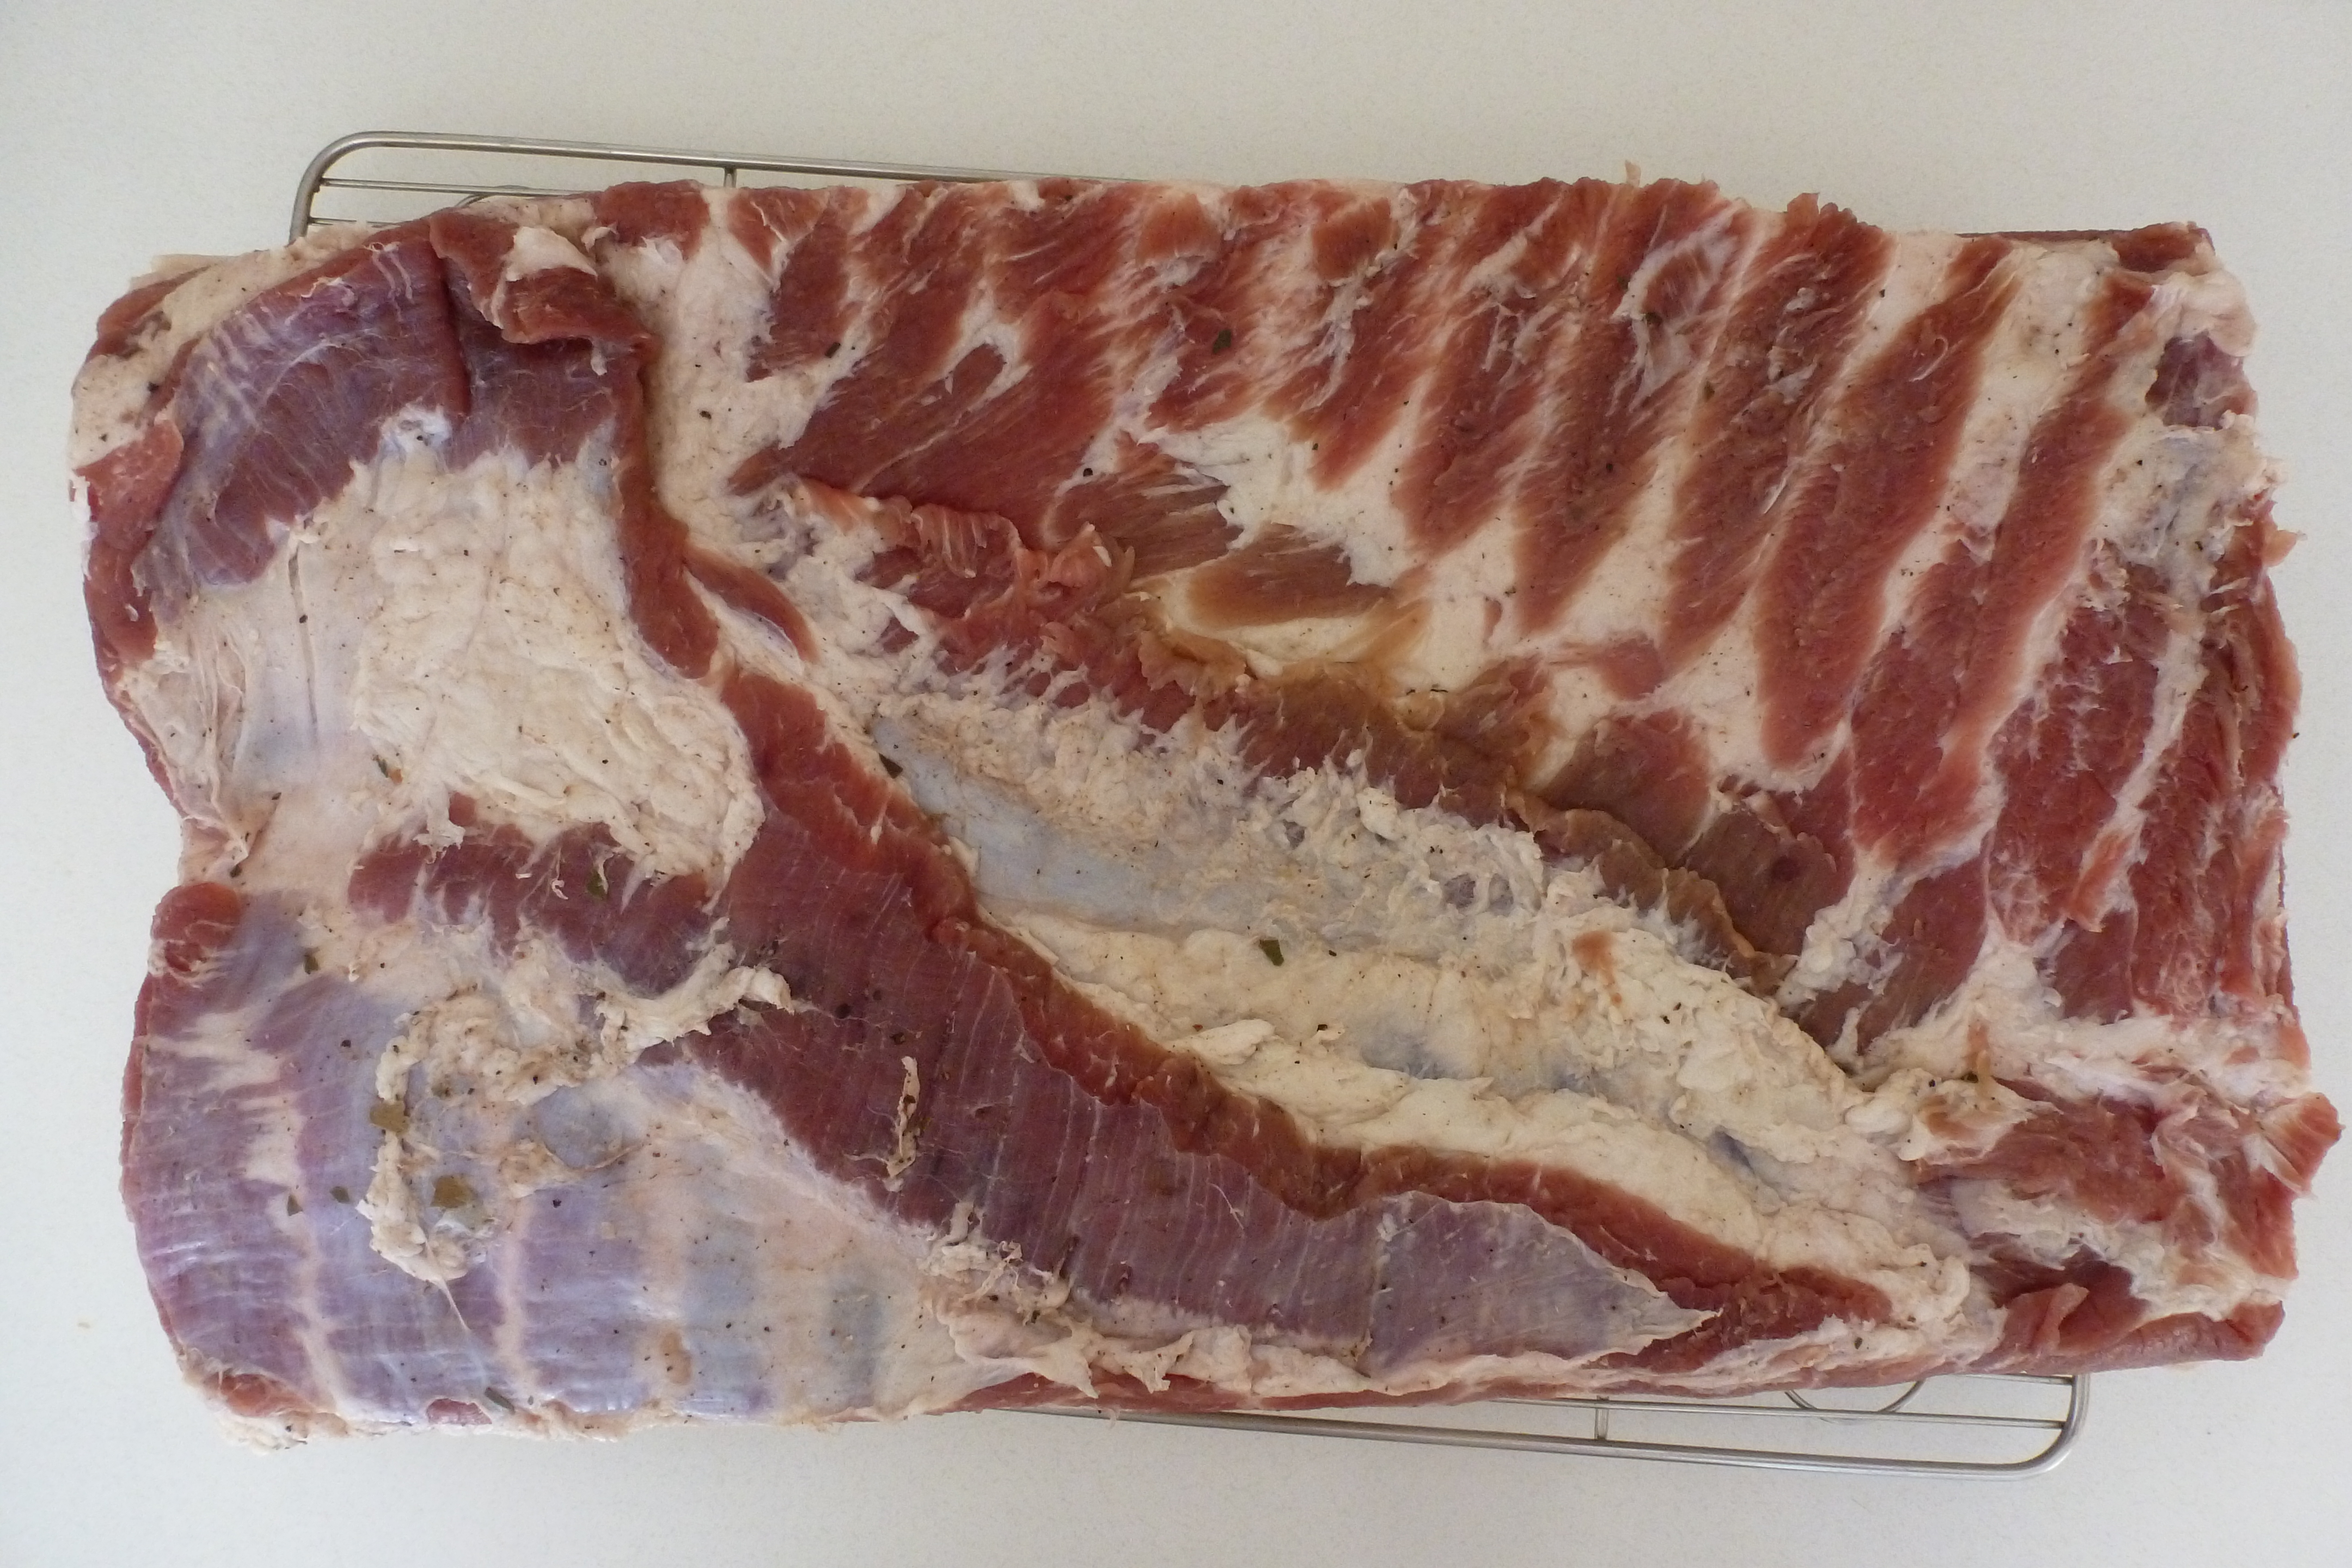 A cured slab of belly